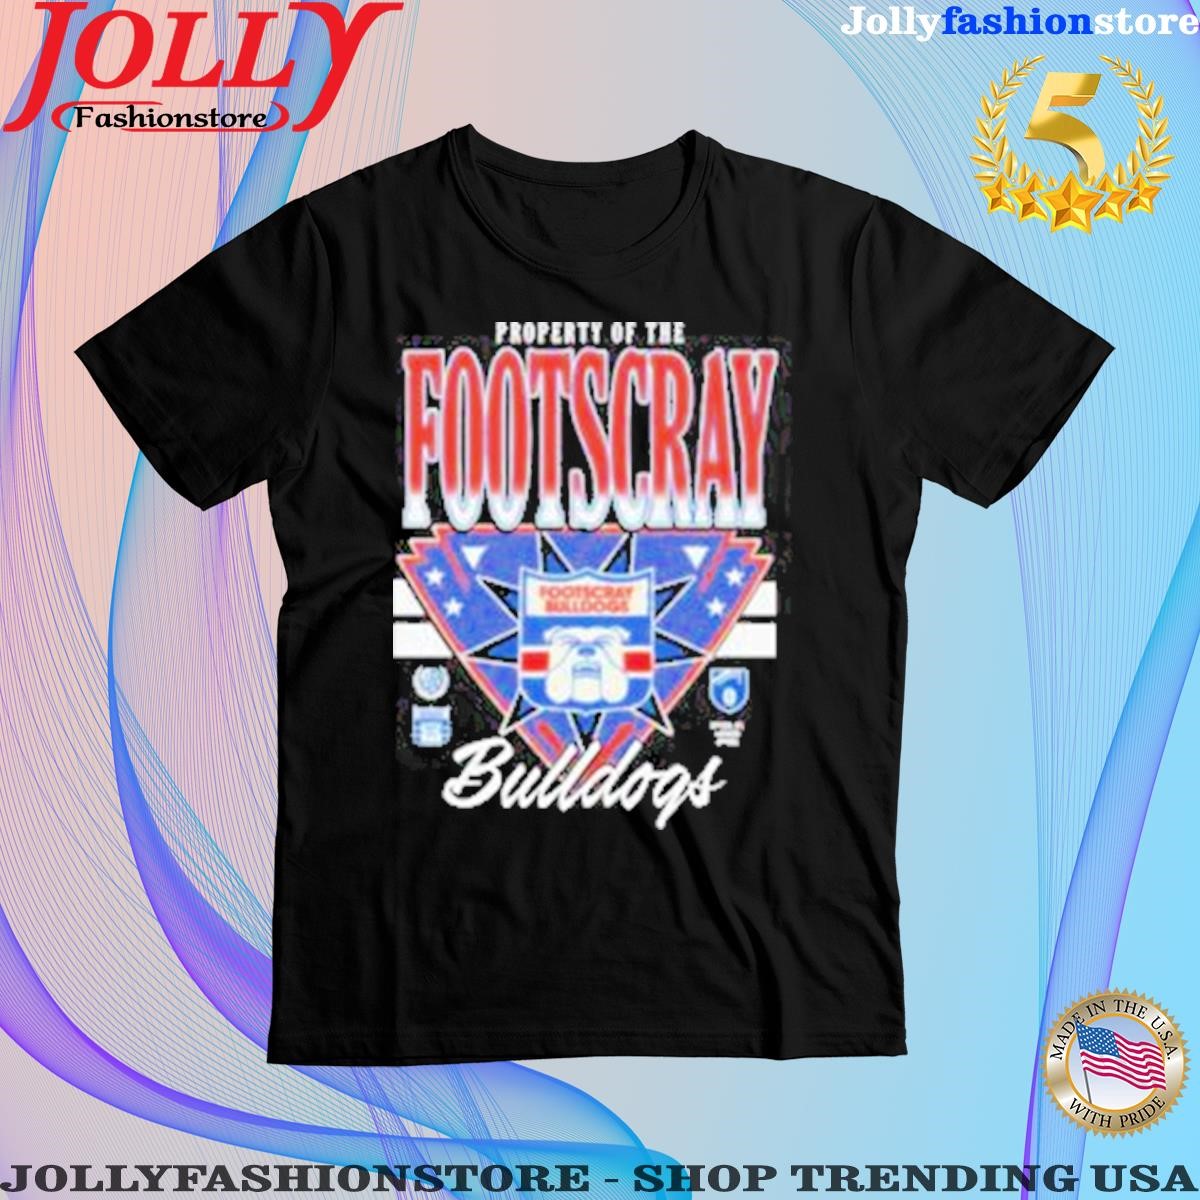 Property Of The Footscray Western Bulldogs 90’S Graphic Shirt